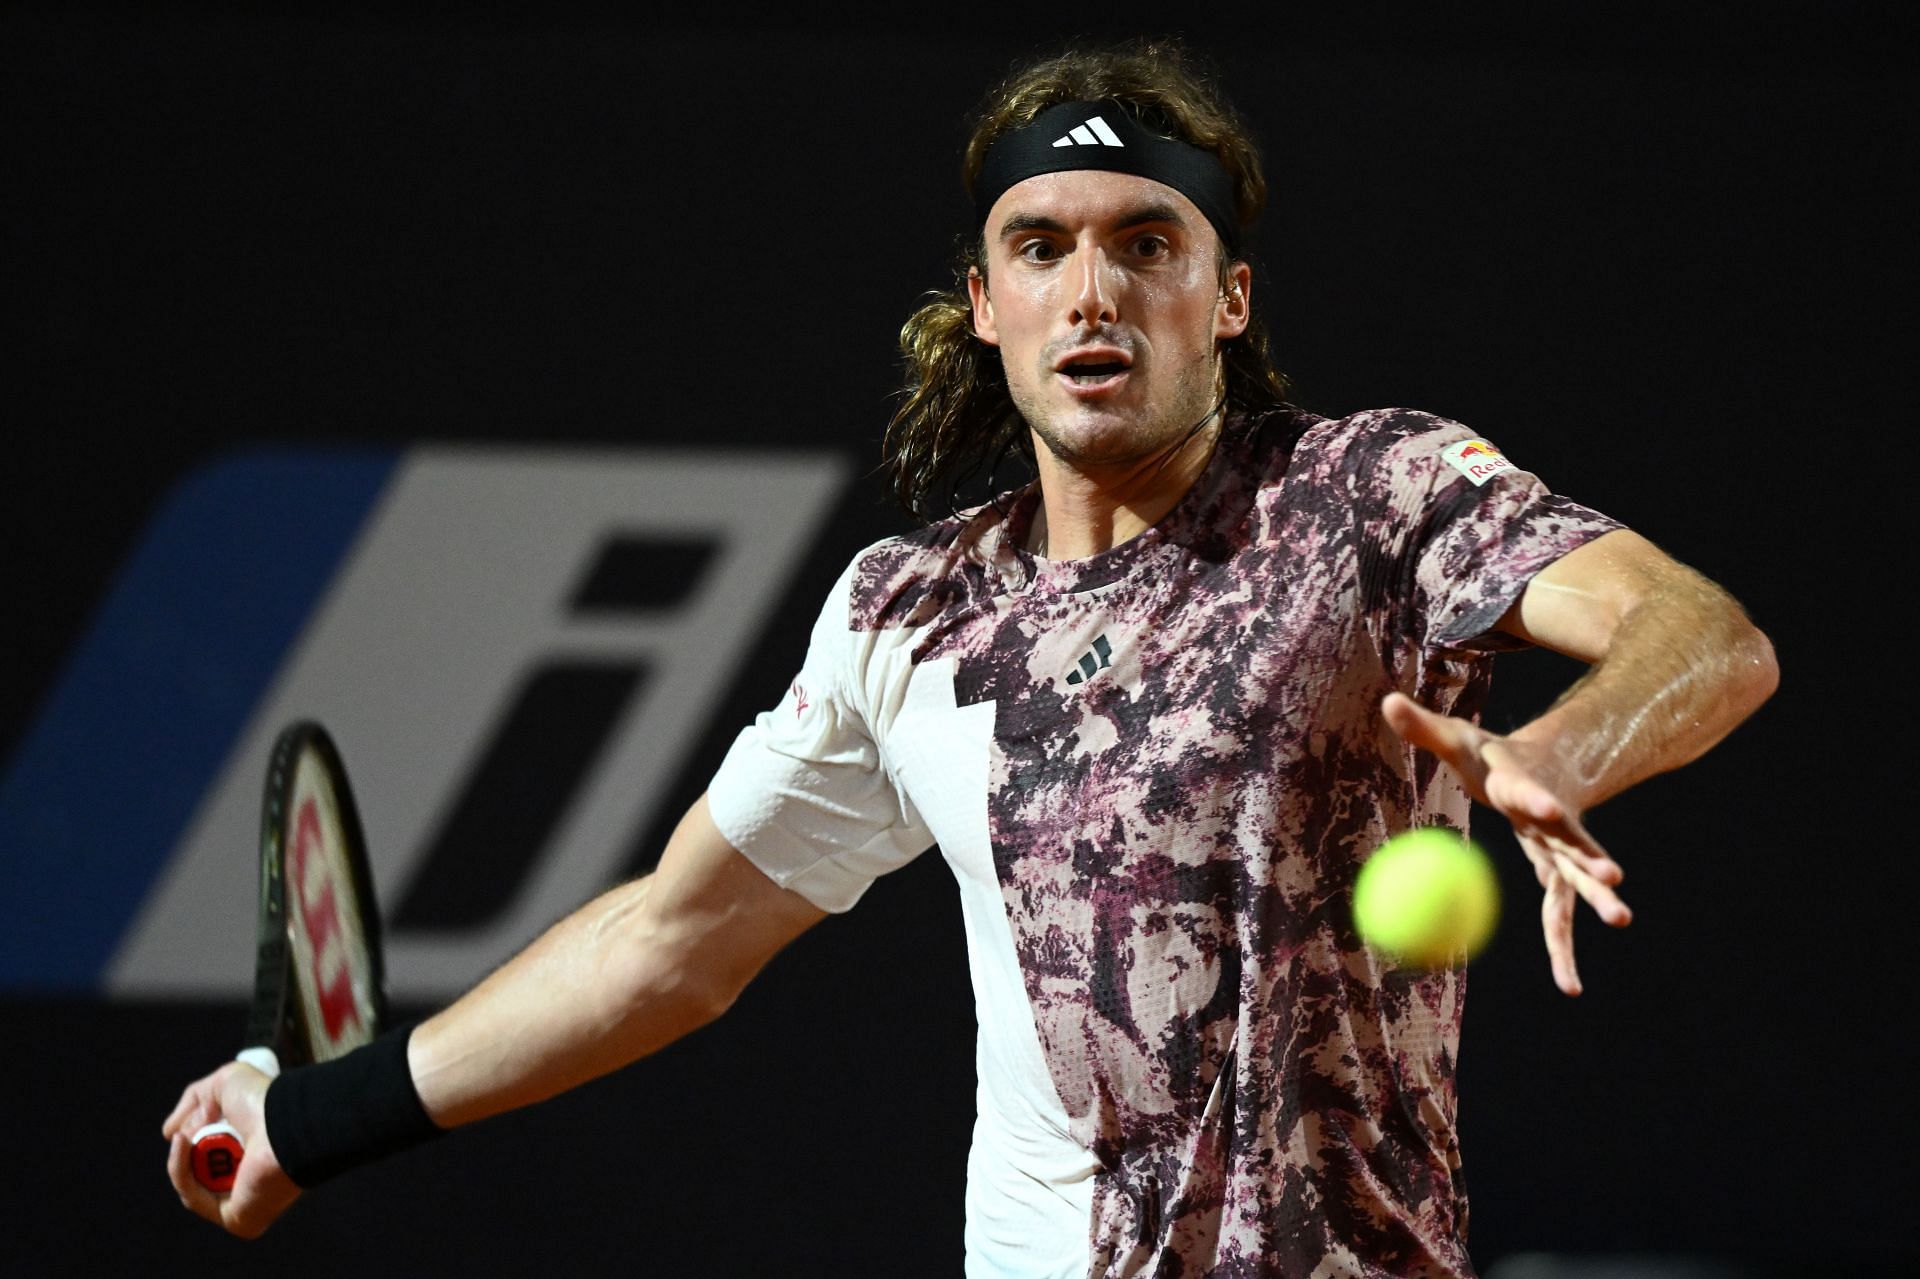 Tsitsipas is back in the Rome semifinals.